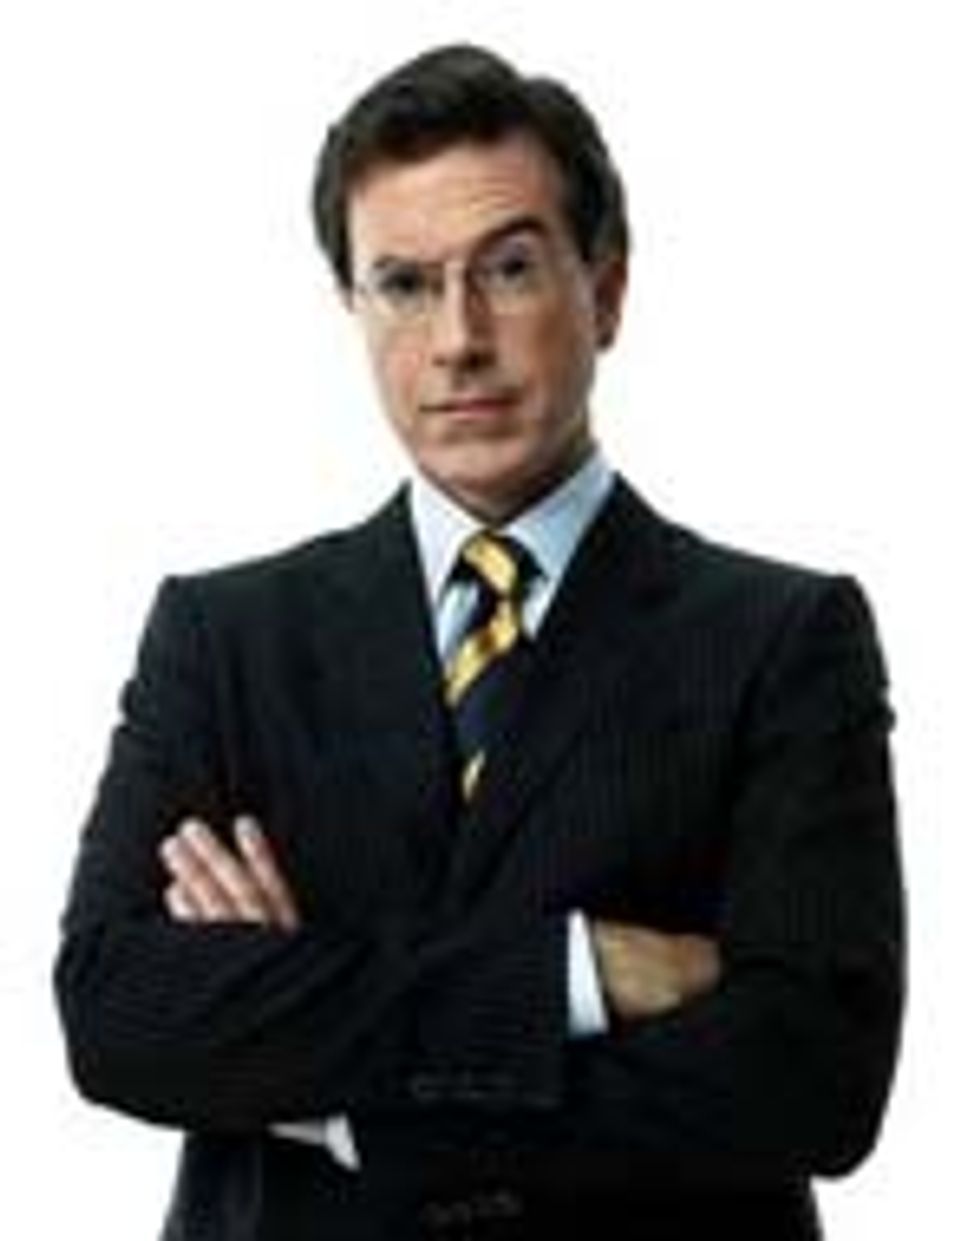 Stephen Colbert Mathematically Proved To Influence American Politics